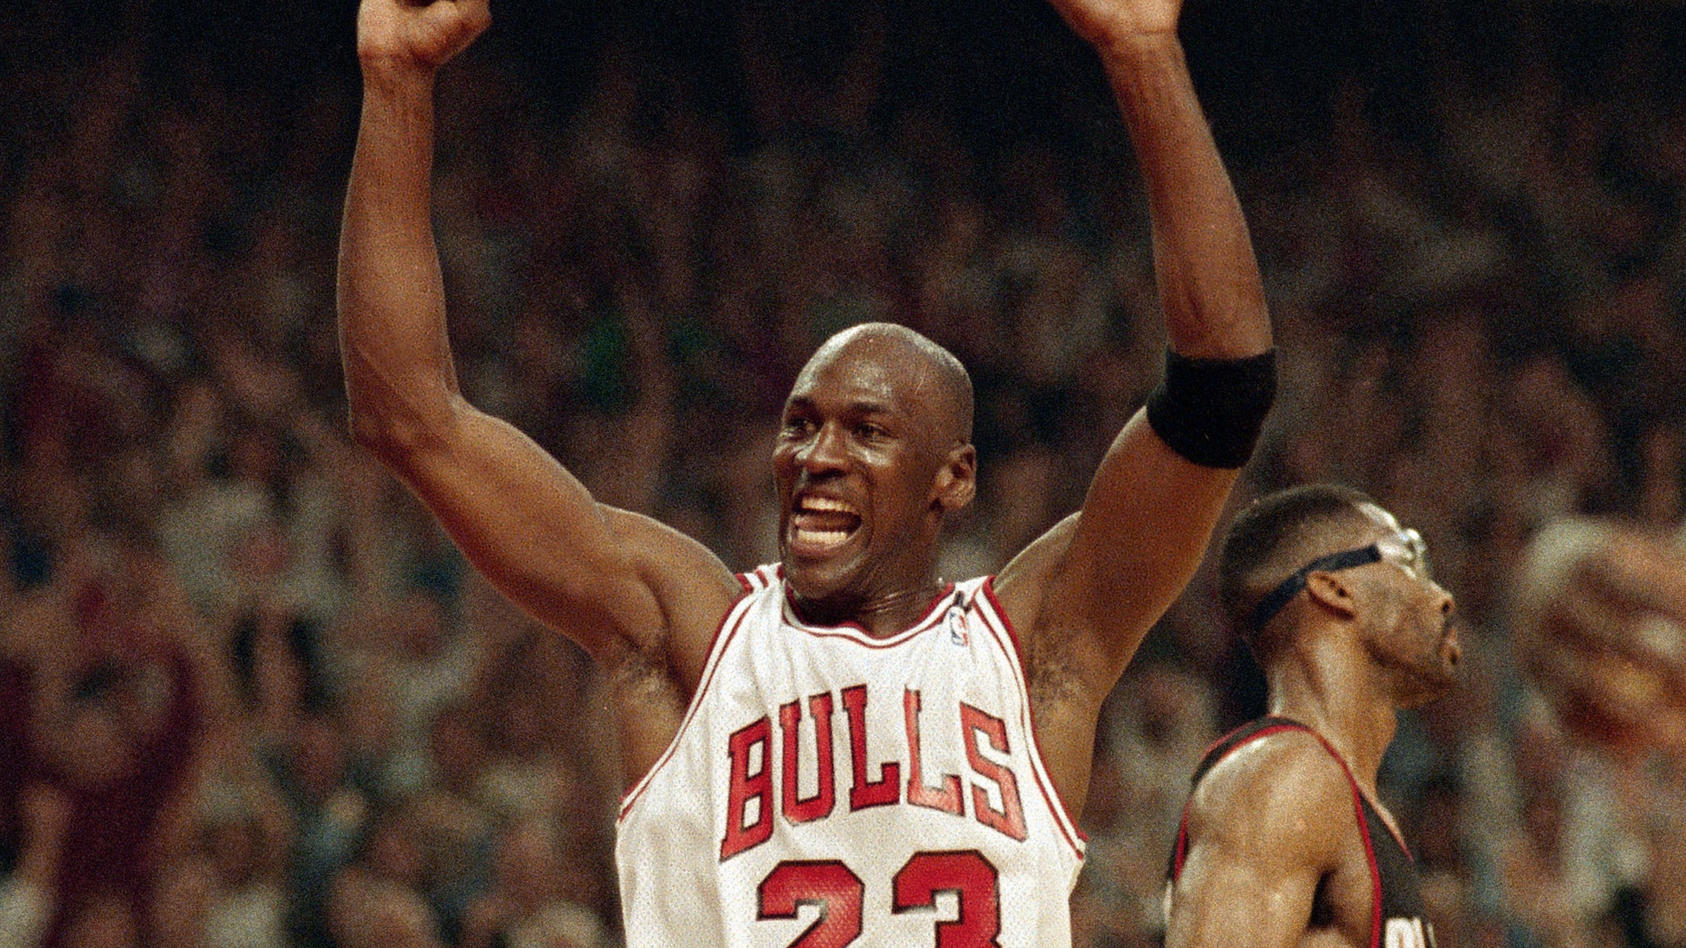 FILE - In this June 14, 1992, file photo, Michael Jordan celebrates the Bulls win over the Portland Trail Blazers in the NBA Finals in Chicago. Decades after Jordan's groundbreaking departure from college, March Madness and the NBA's mega-millions ha